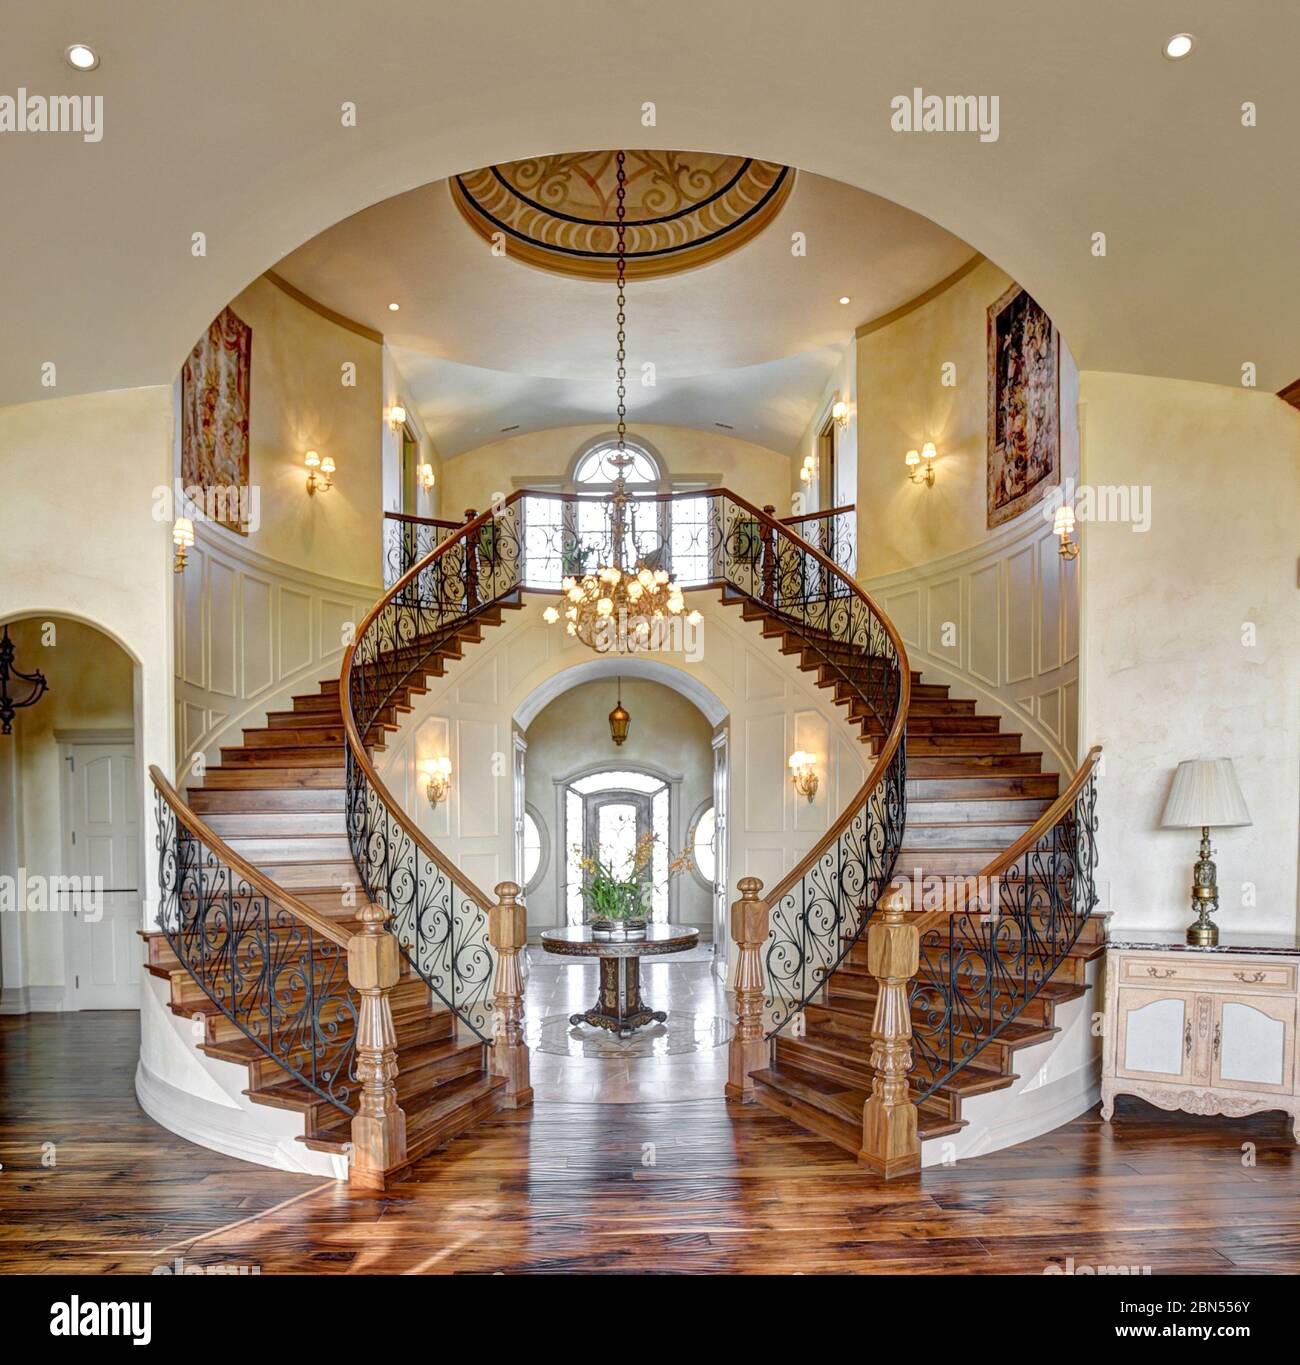 The grand staircase with walnut stair treads, newell posts and banisetrs in an upscale custon build home. Stock Photo